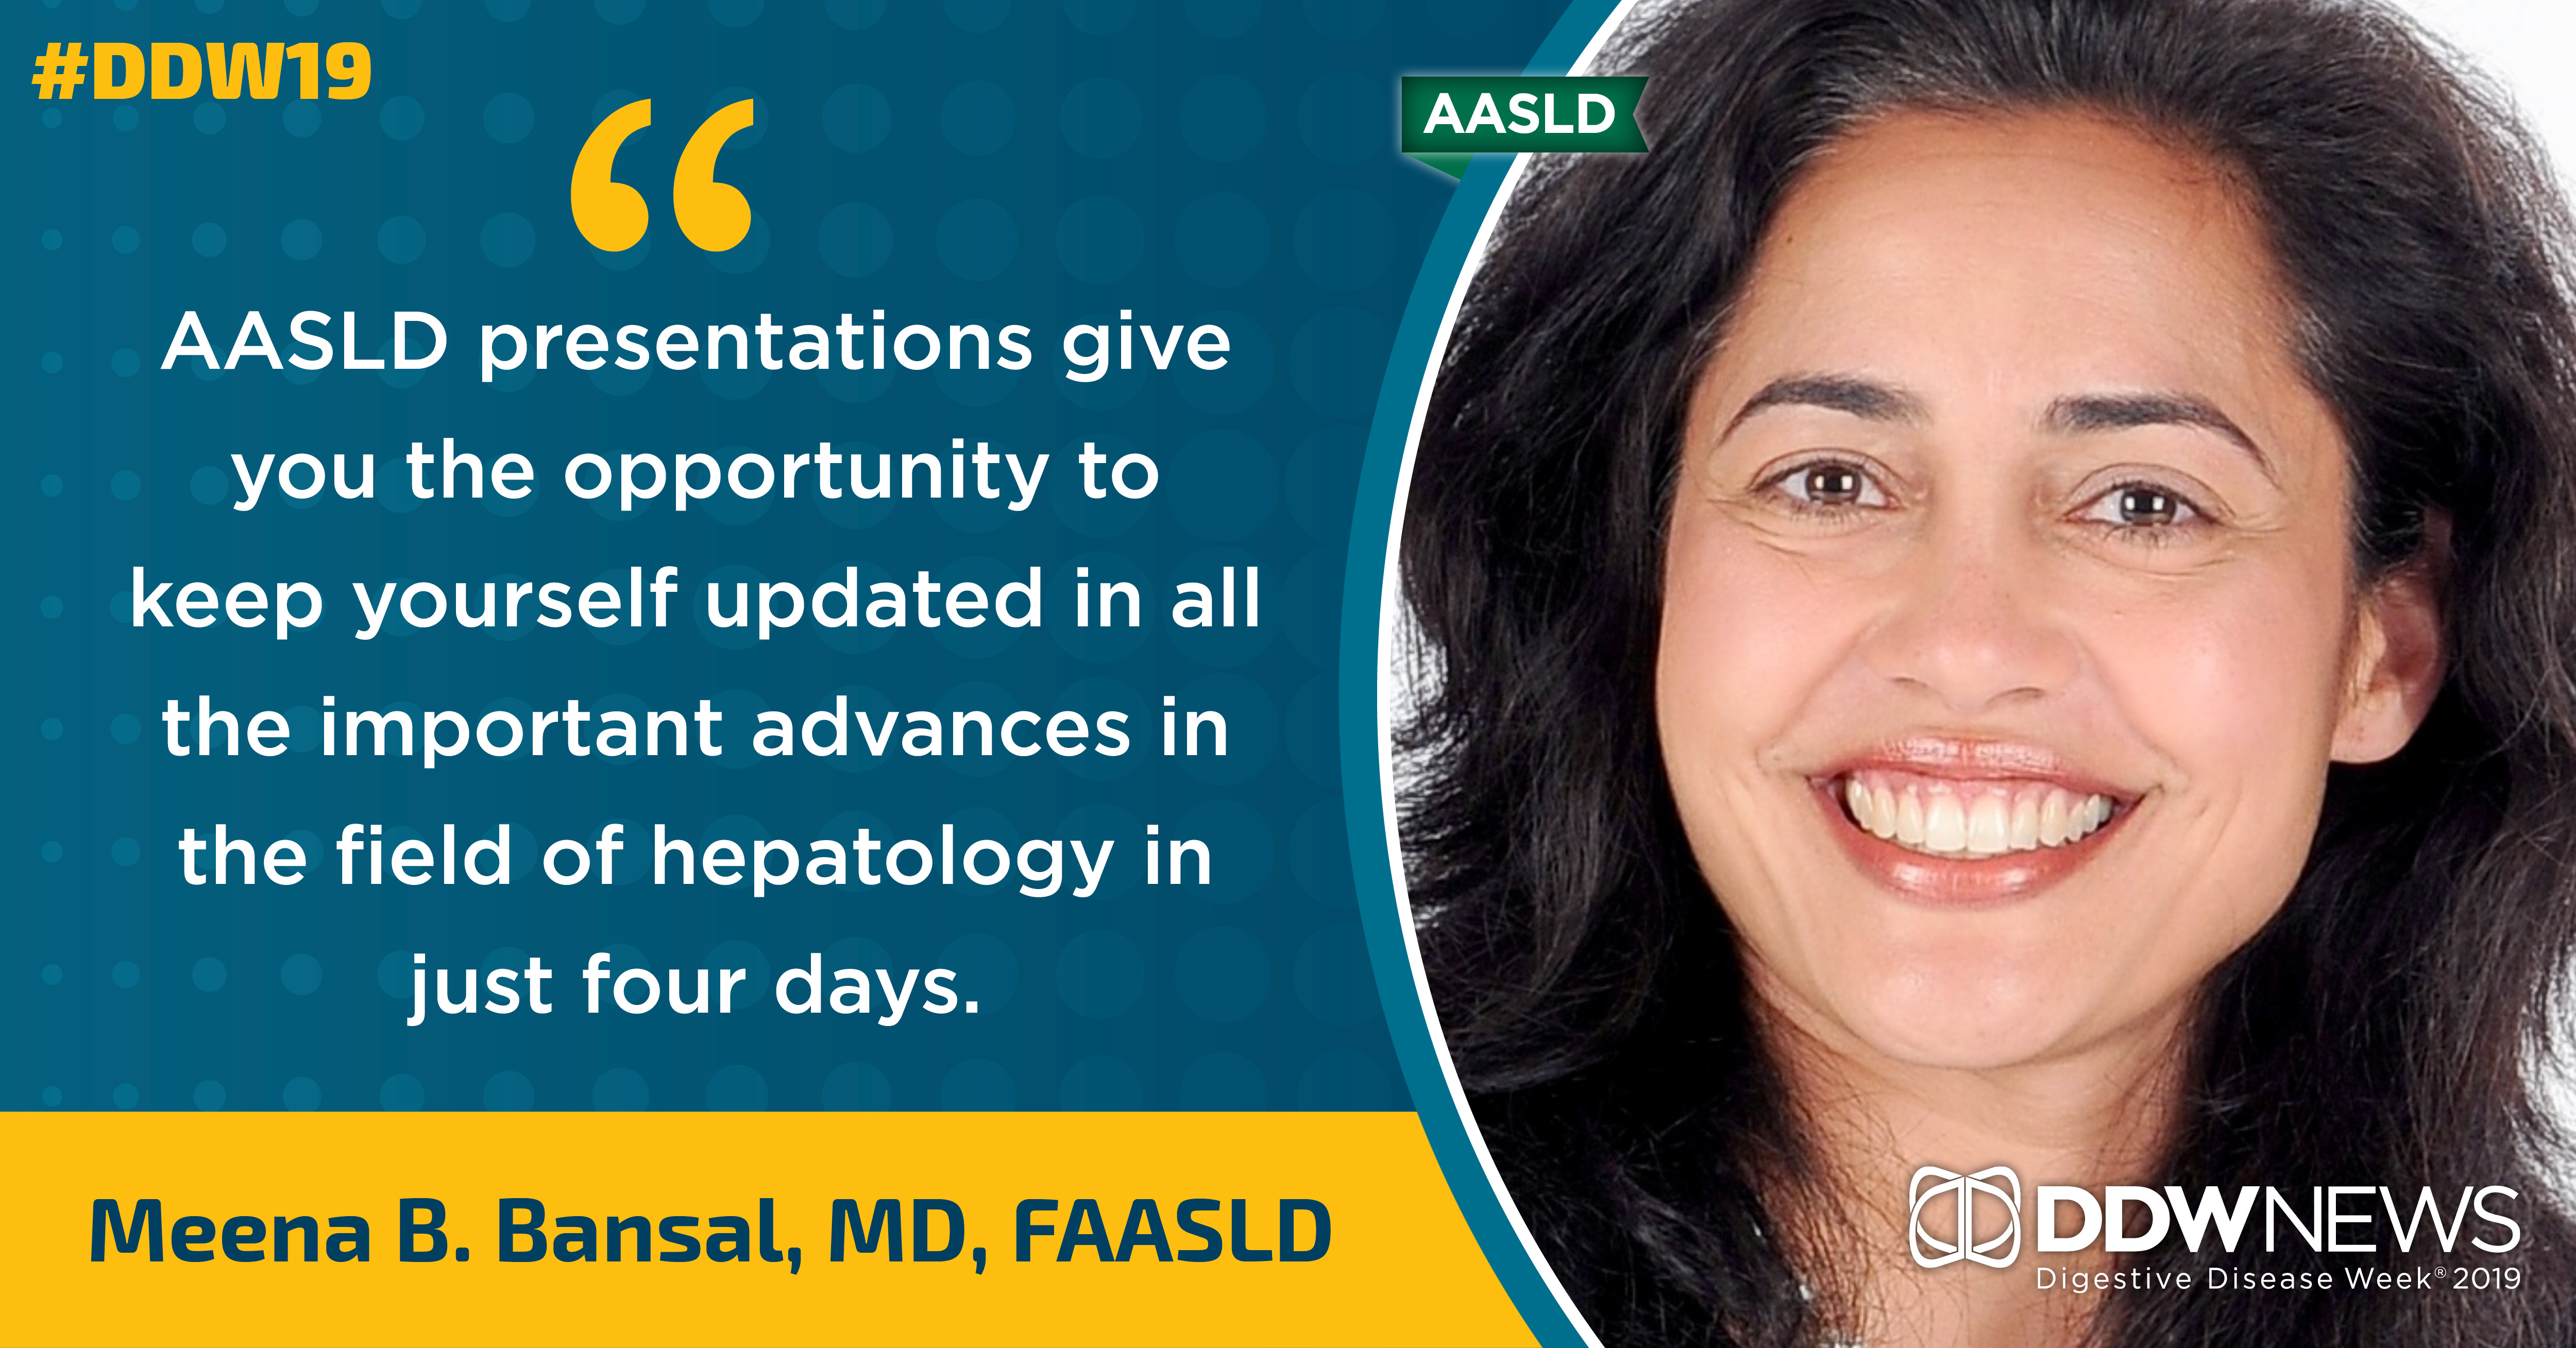 AASLD programming will highlight latest advances in hepatology DDW News